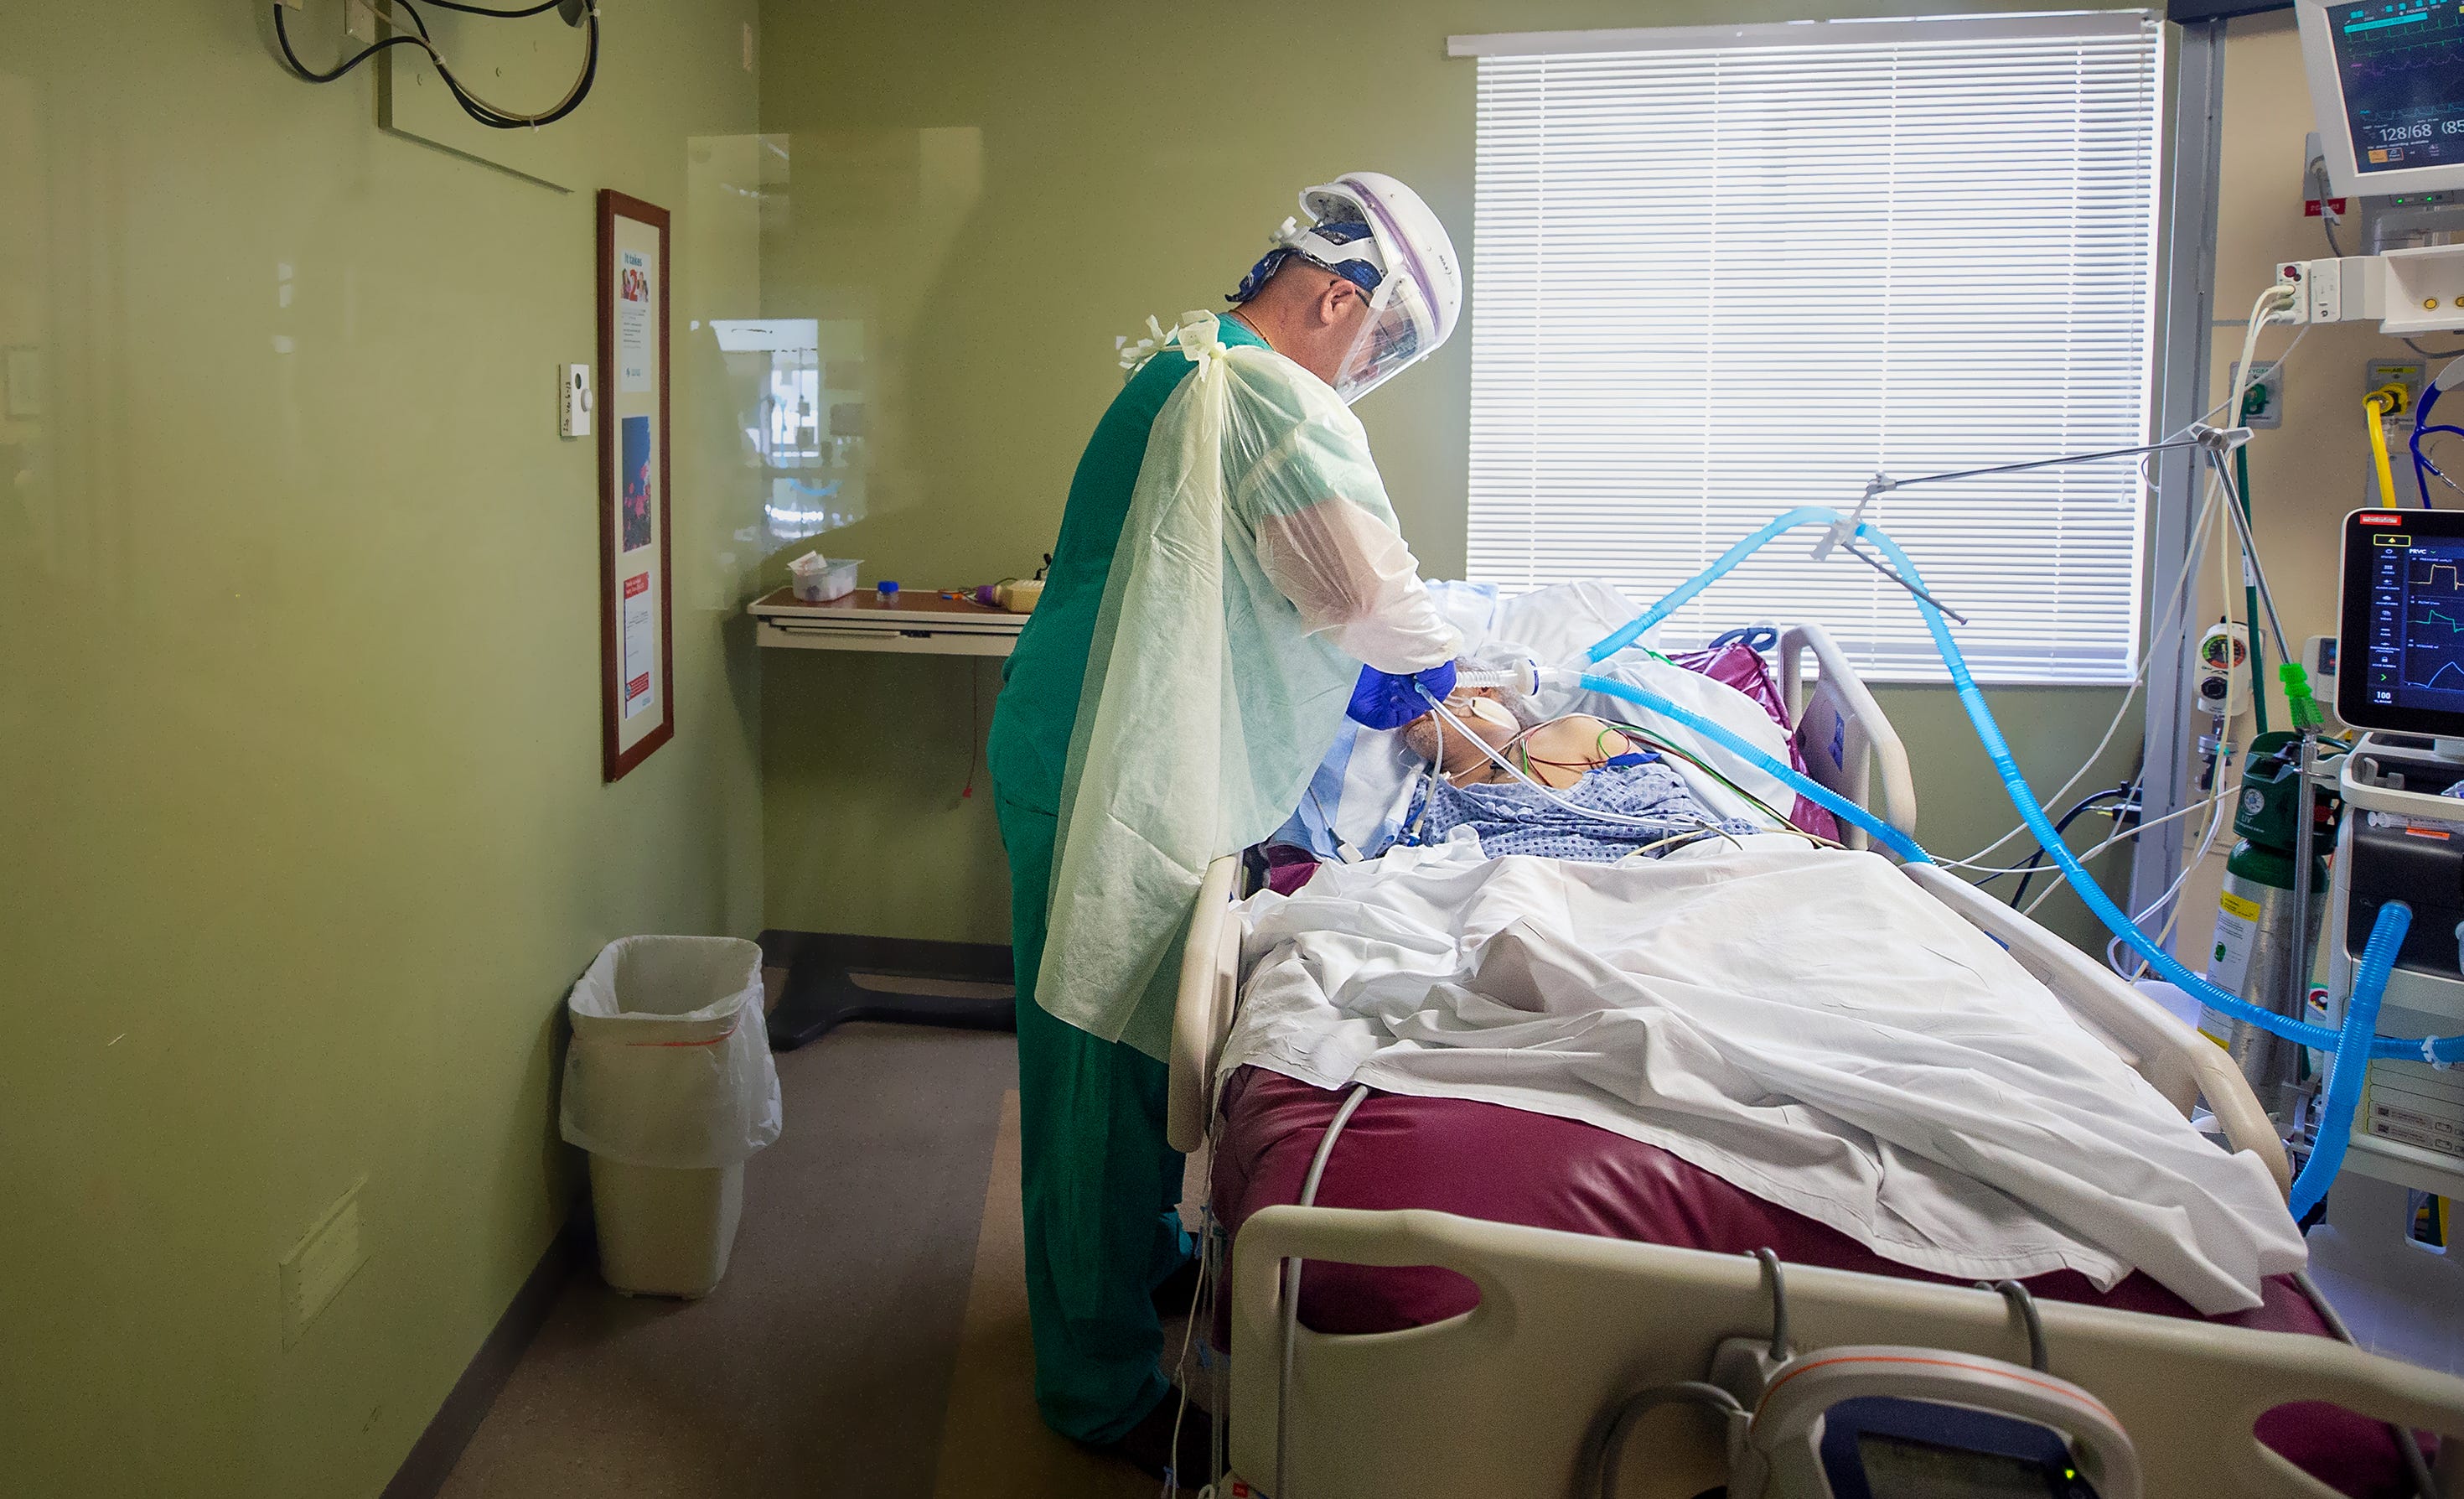 Registered nurse Robert Atchison cares for a COVID-19 patient in the intensive care unit at Gulf Coast Medical Center in Fort Myers, Florida. "We're saving everyone we can," Atchison said.